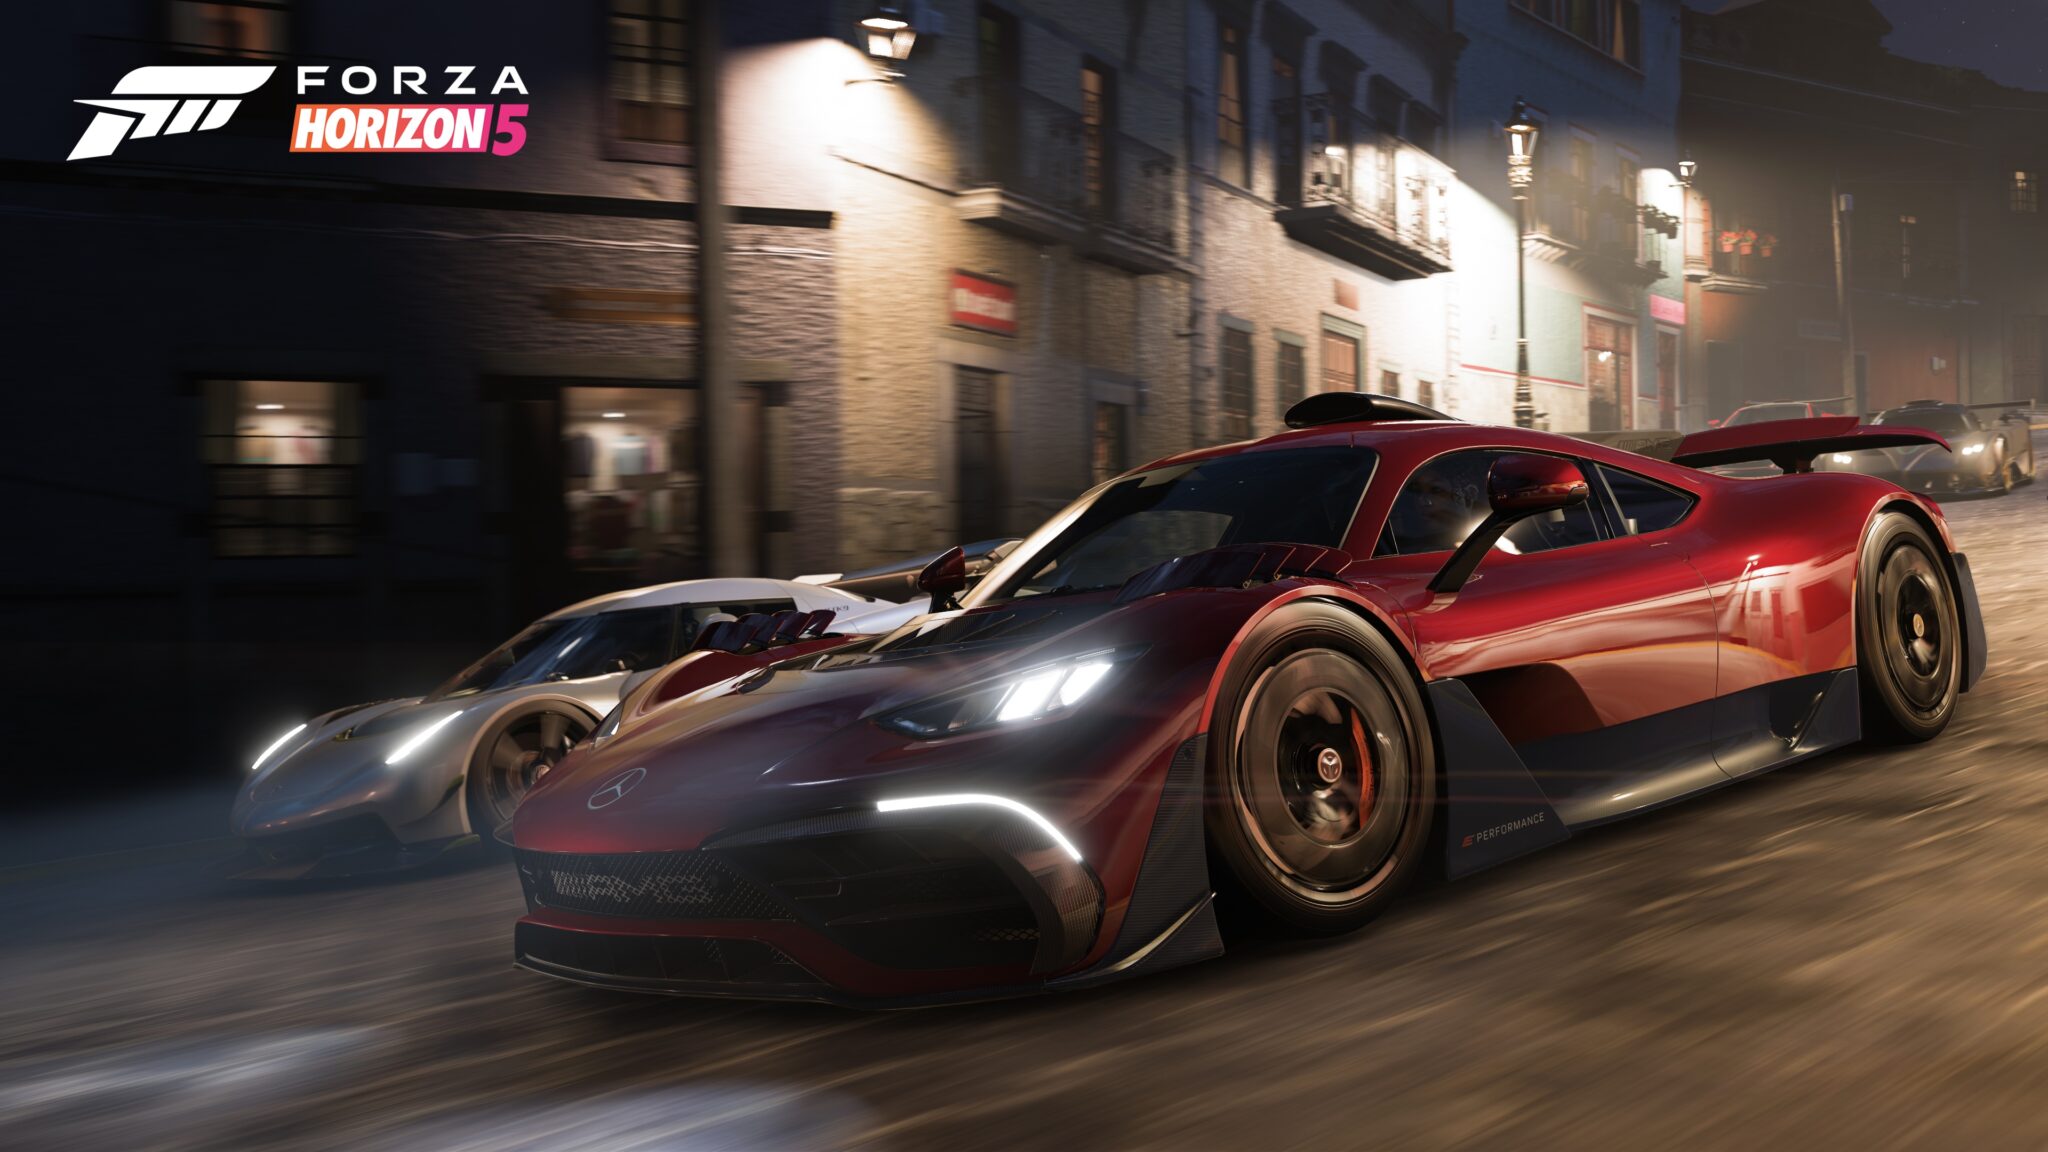 Forza Horizon 5 offers a classic racing fantasy, of course - but you don't have to pursue it.